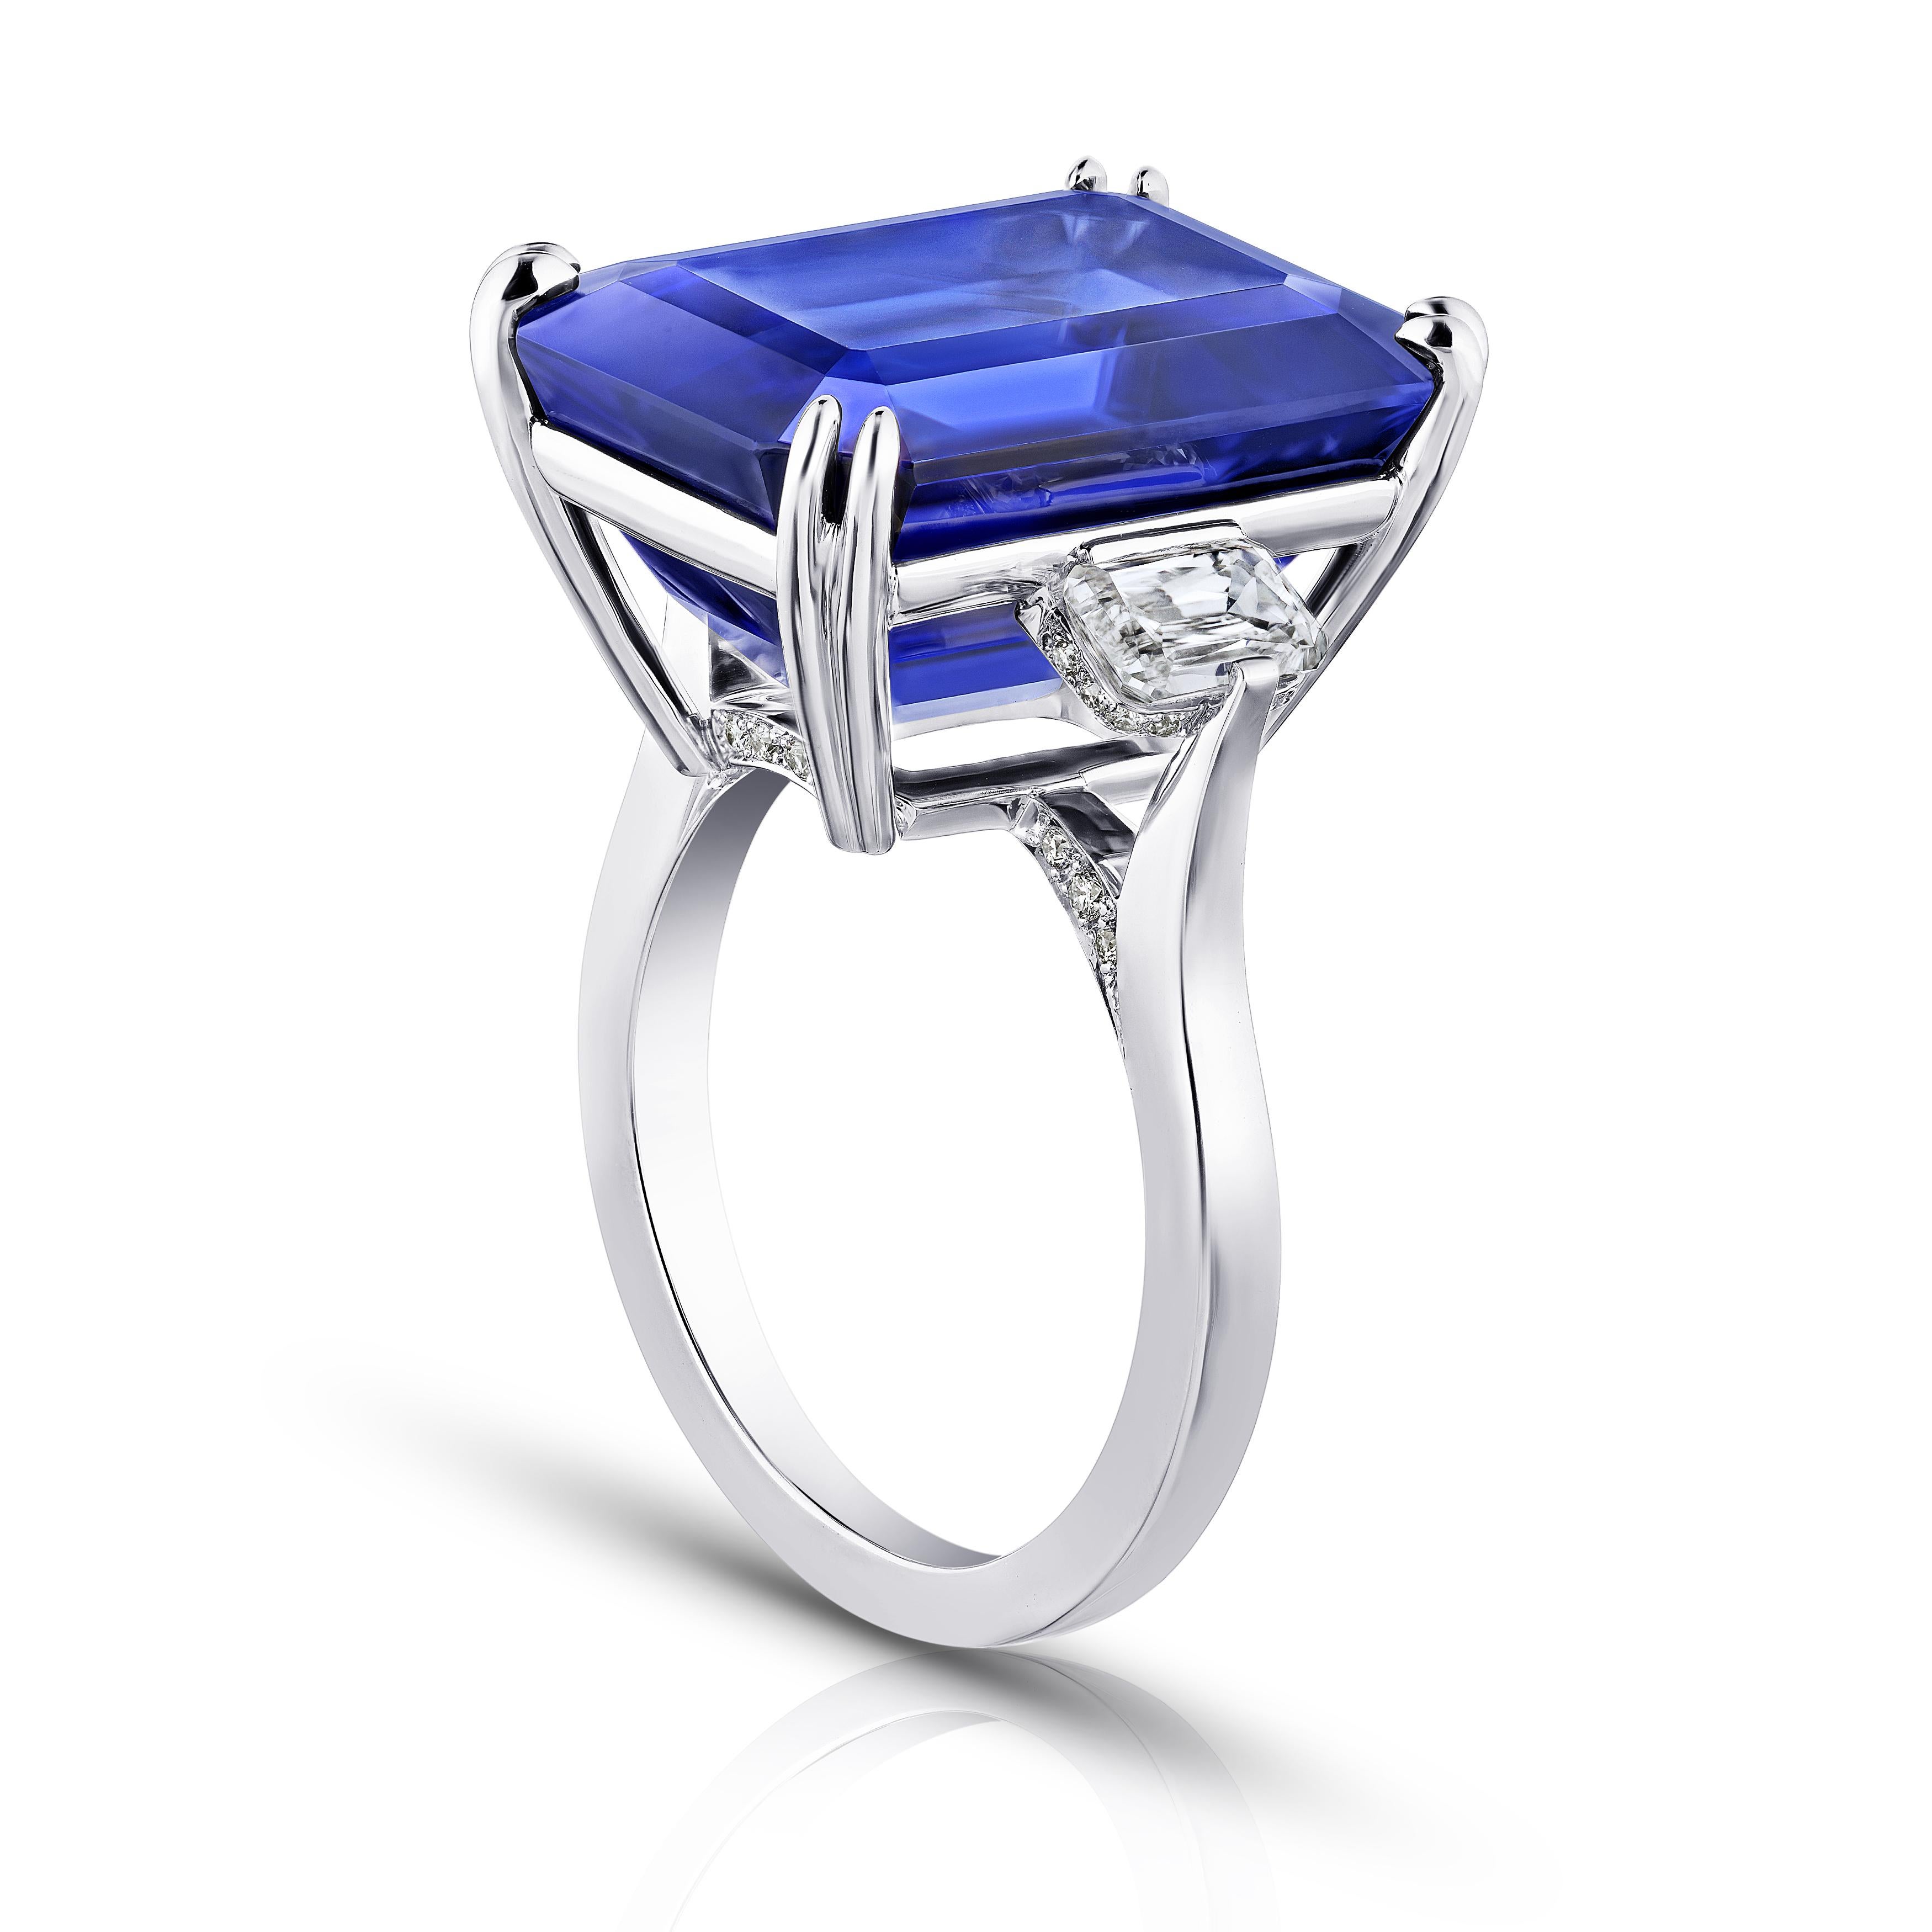 19.97 carat emerald cut blue tanzanite with 2 antique cushion diamonds 1.02 carats and 36 round diamonds .14 carats set in a platinum ring. Size 7. Resizing to your finger size is free. This tanzanite is loupe clean and exception color and